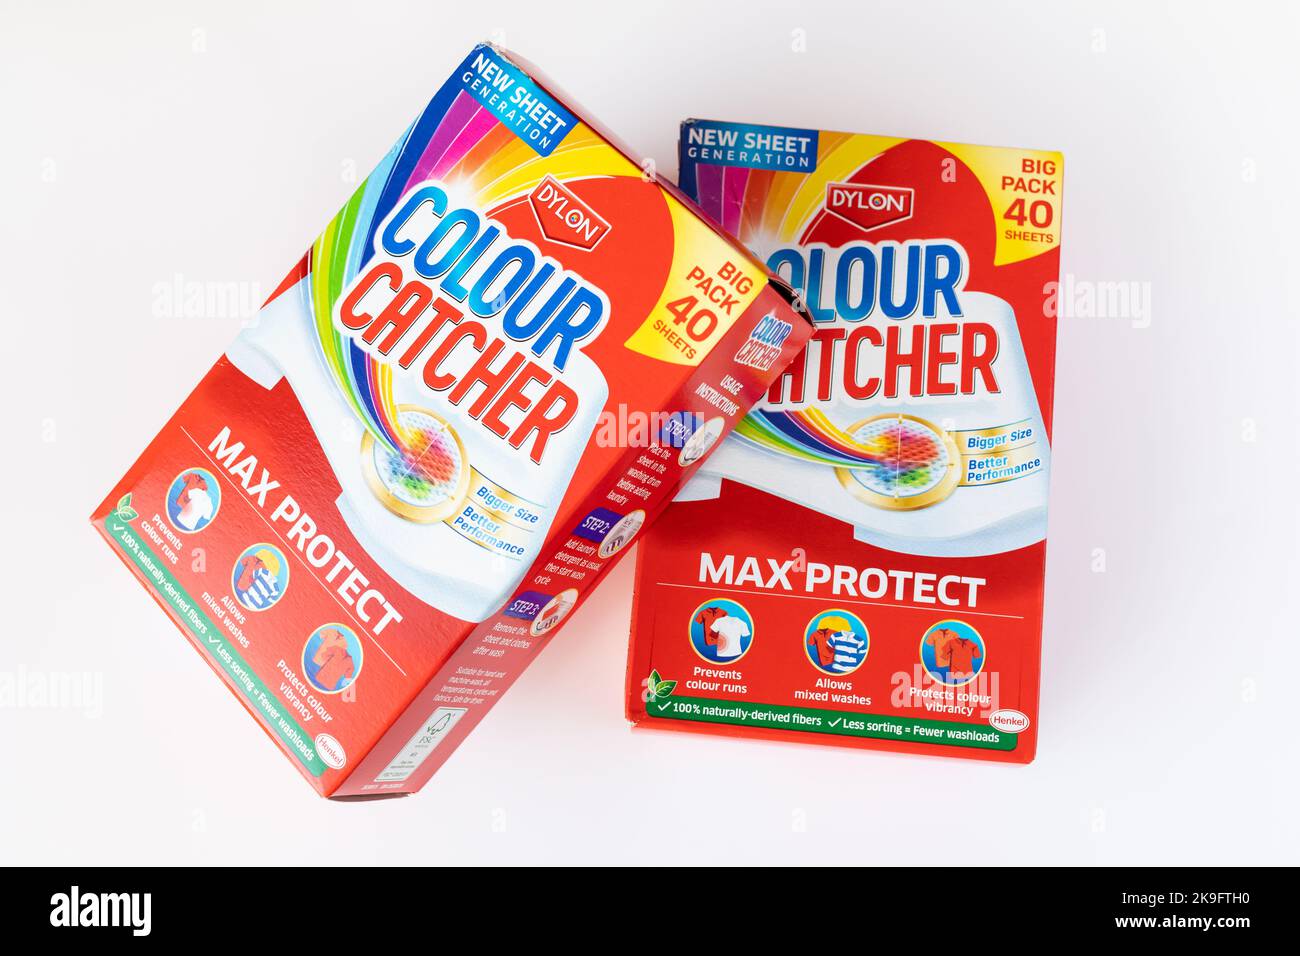 Colour catcher hi-res stock photography and images - Alamy